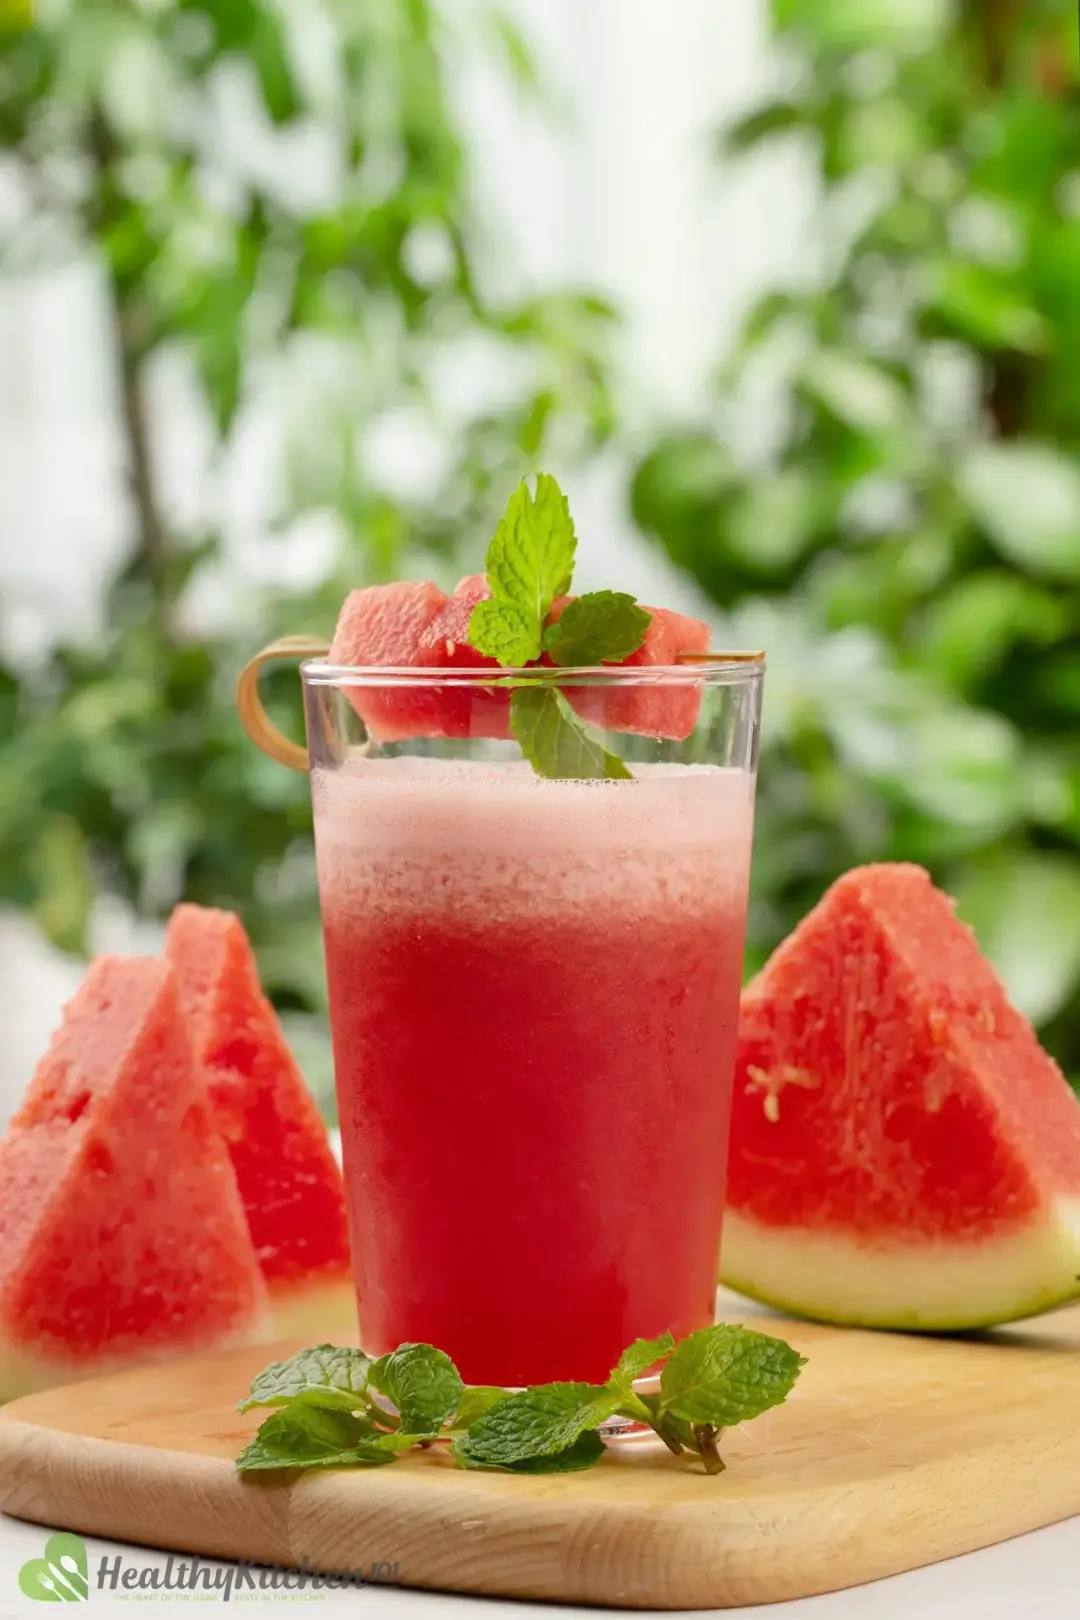 A glass of watermelon smoothie garnished with watermelon cubes and mint leaves on a wooden board next to three watermelon slices and some mint leaves